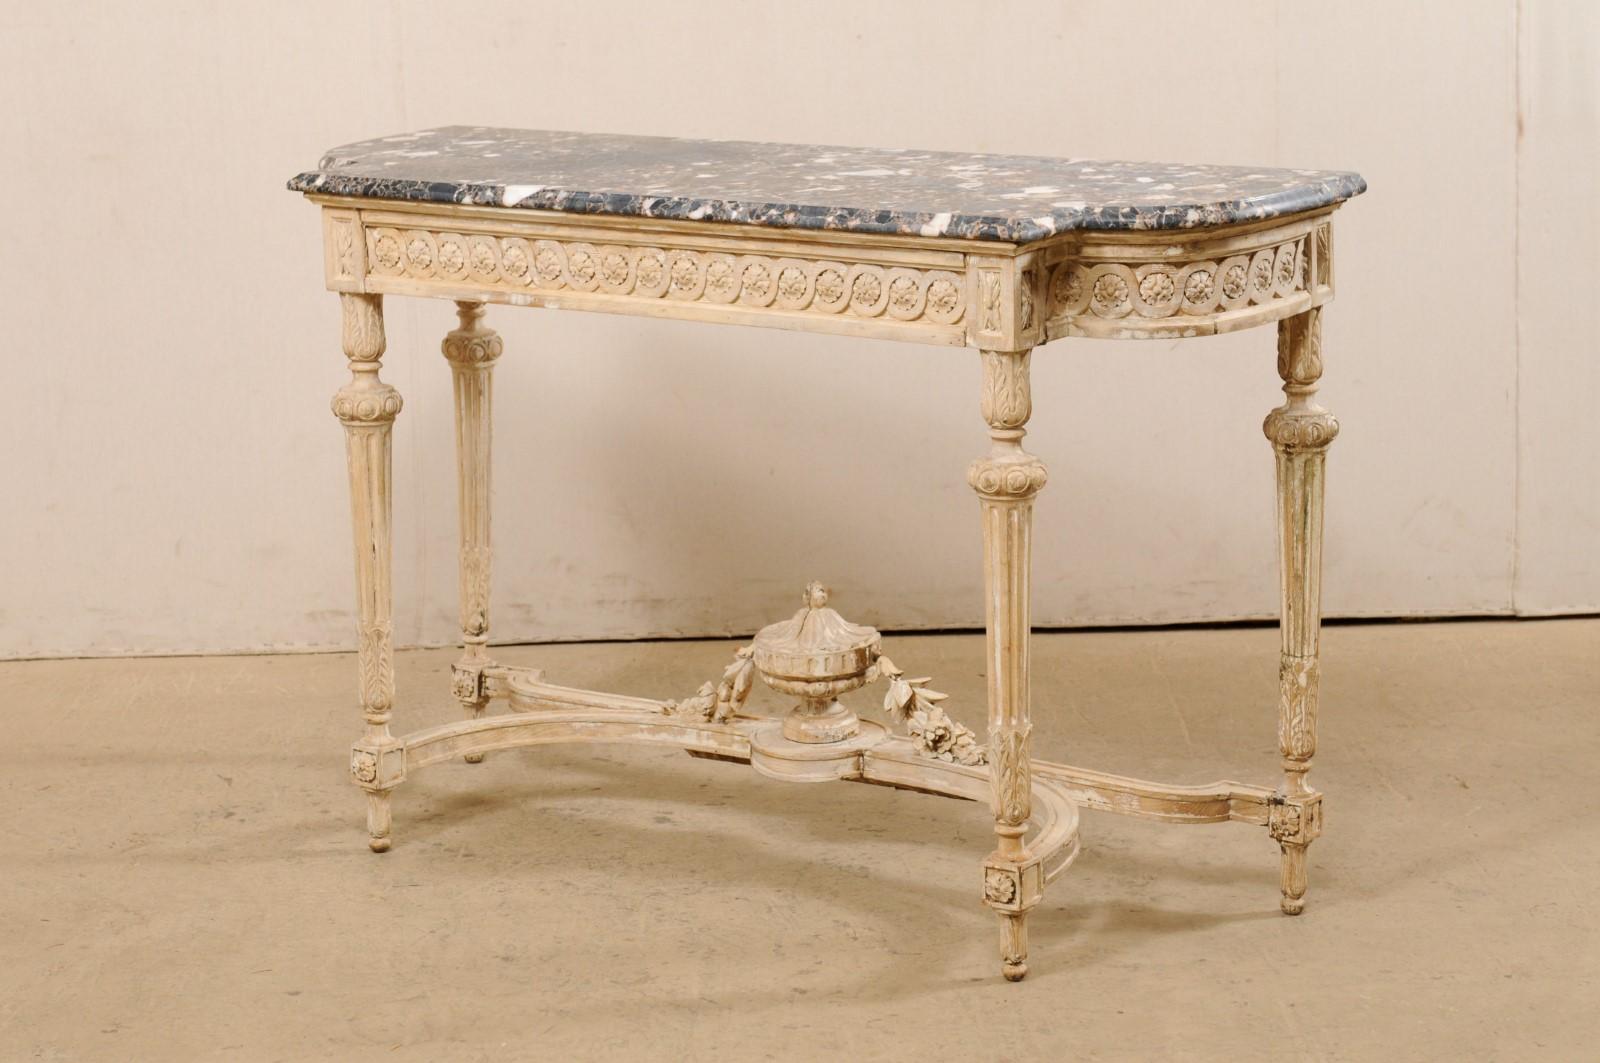 19th Century Antique French Marble-Top Console Table with Carved Urn & Foliage at Underside